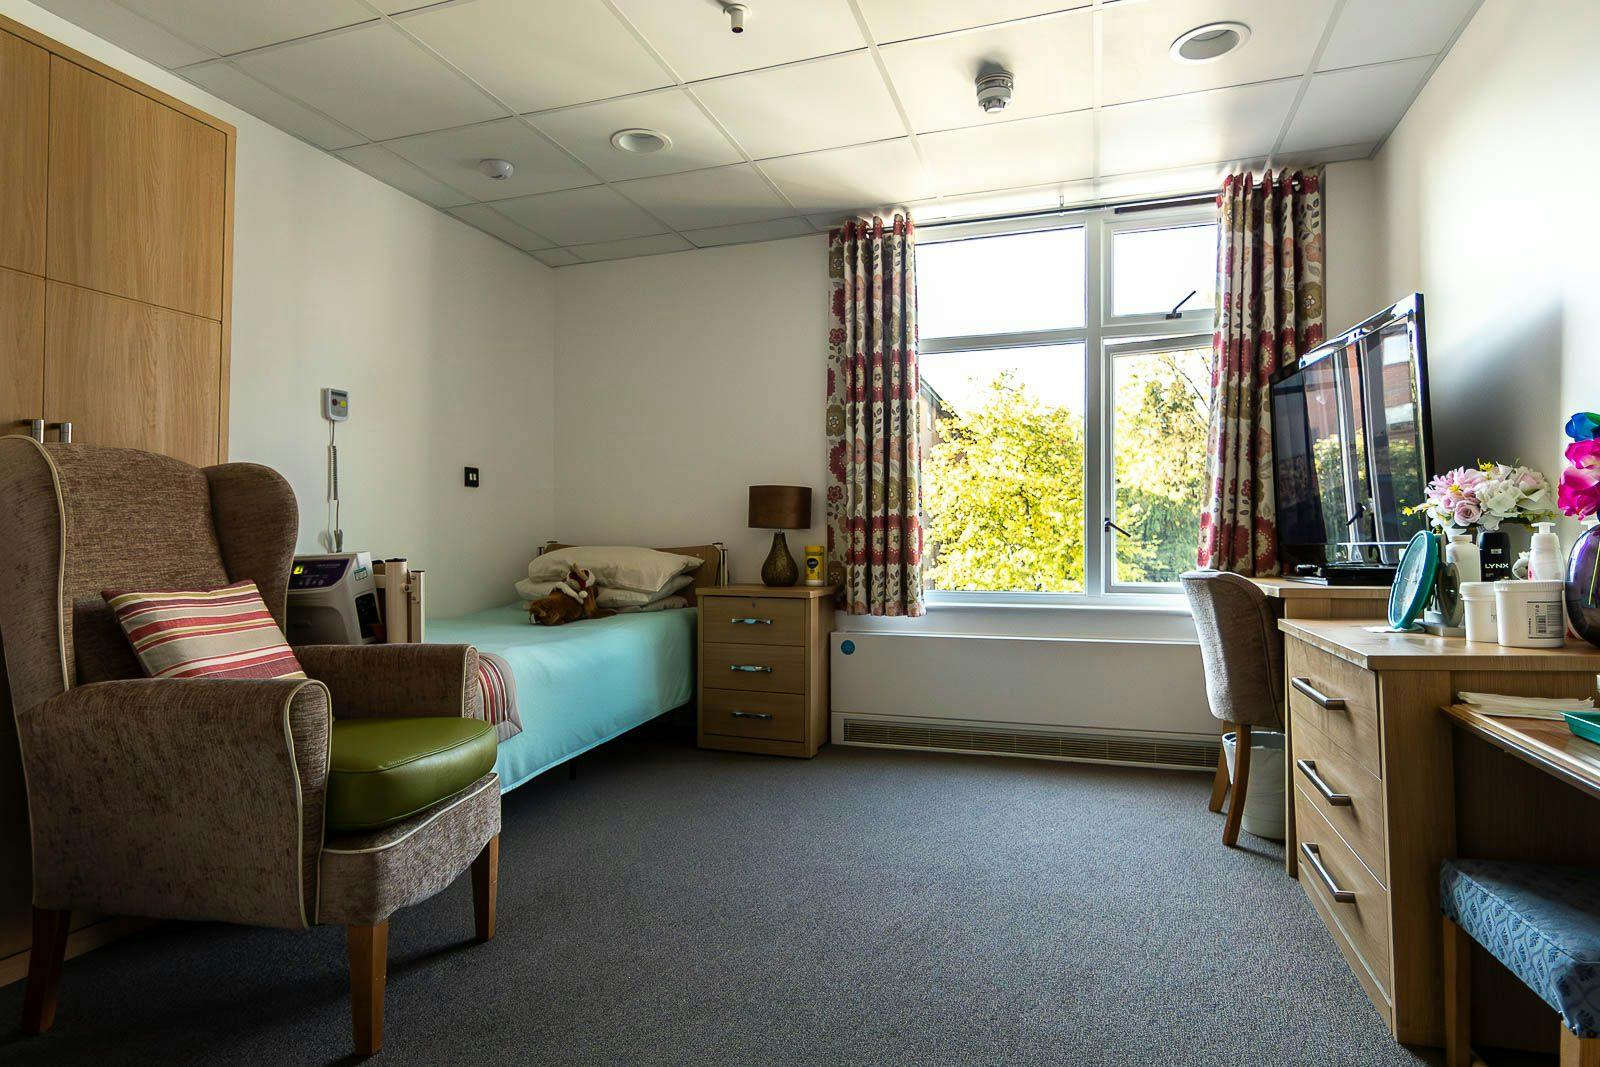 Bedroom of Meadowside care home in North Finchley, London